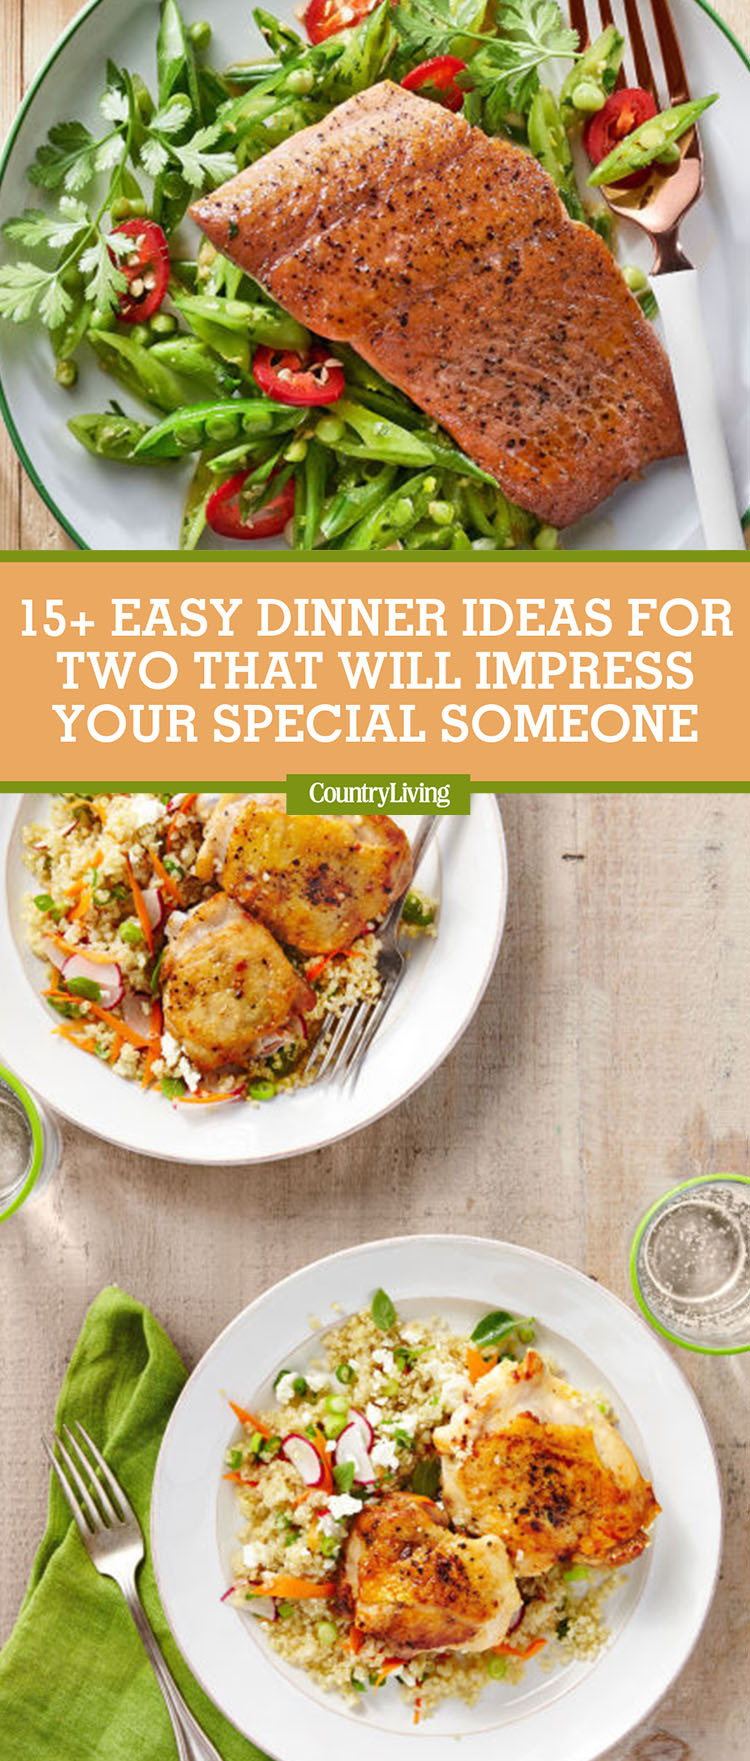 Easy Dinners For Two
 17 Easy Dinner Ideas for Two Romantic Dinner for Two Recipes